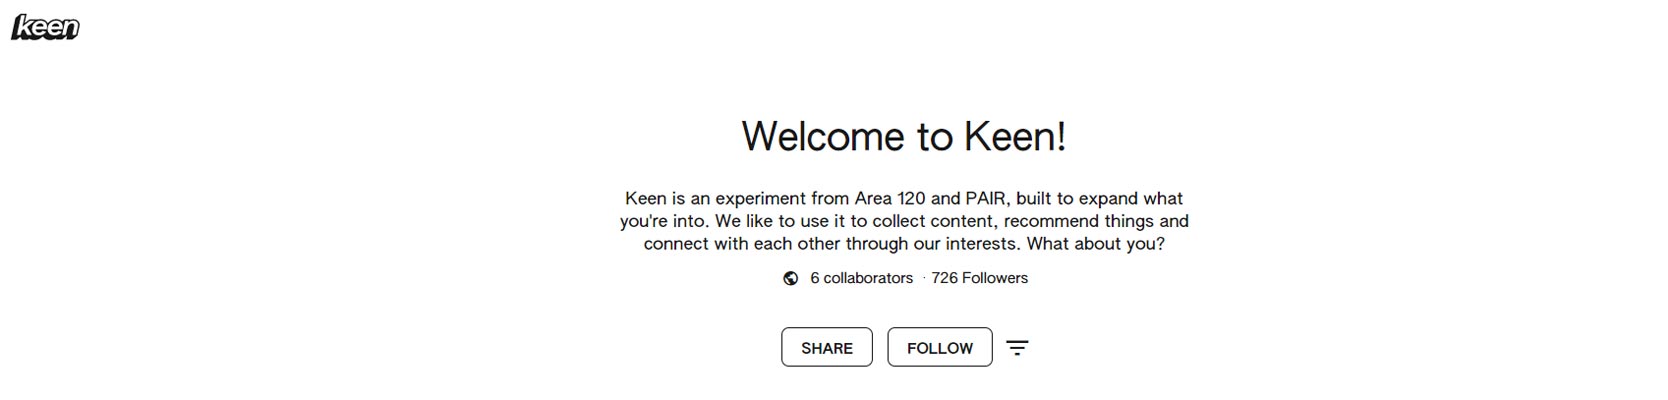 Google Keen Official Account Page